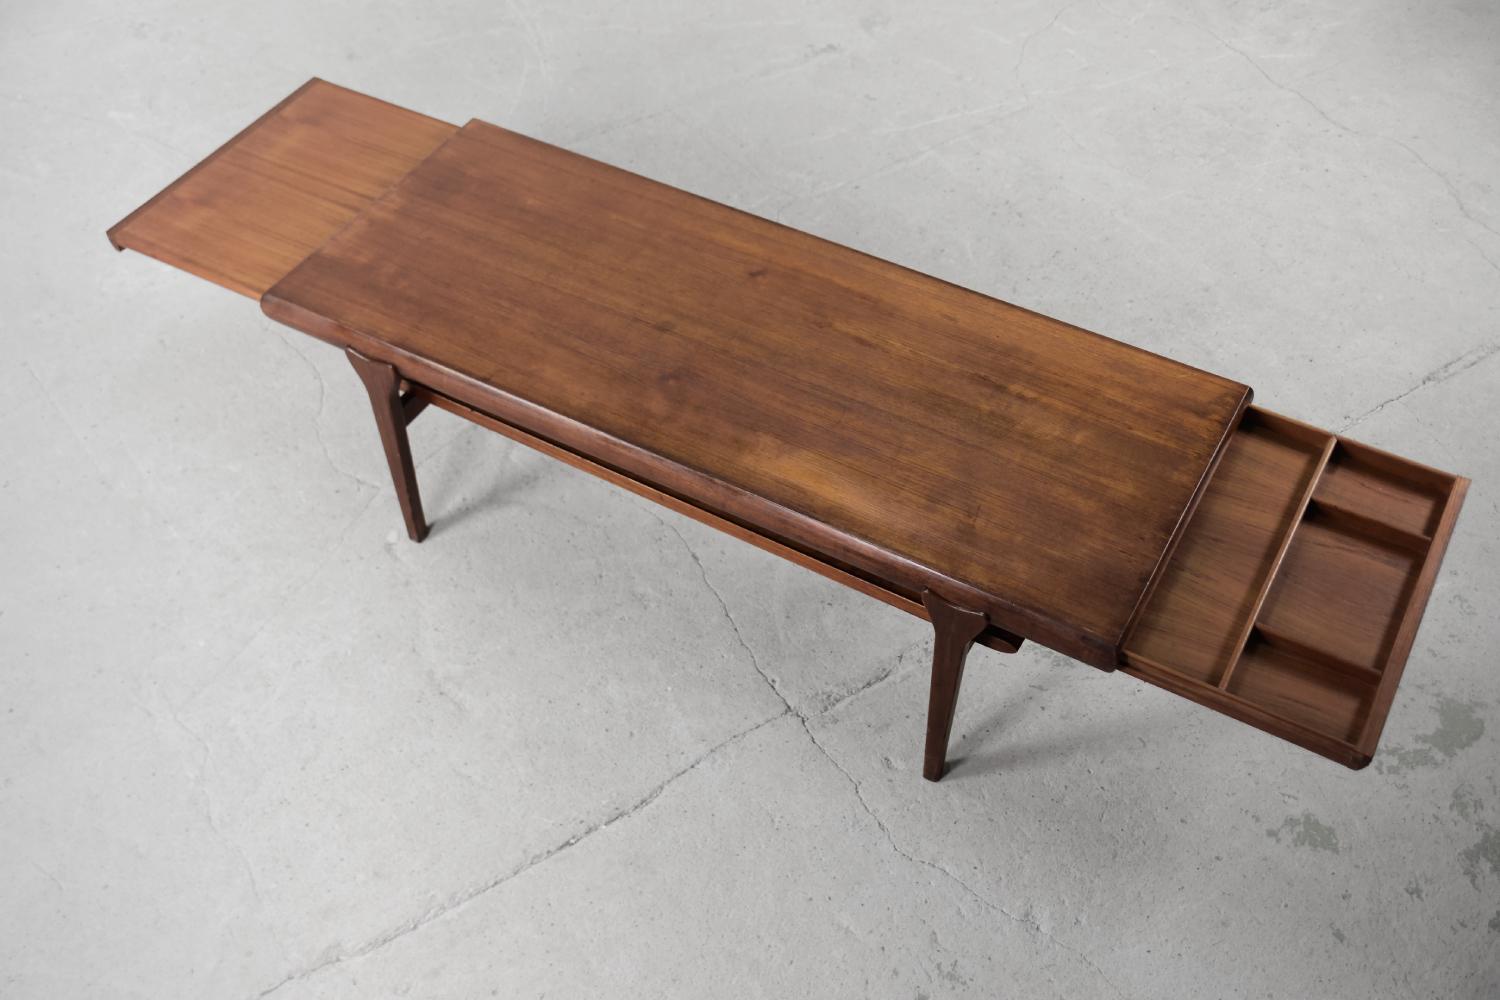 Vintage Mid-century Modern Scandinavian Extendable Teak Coffee Table with Drawer For Sale 4